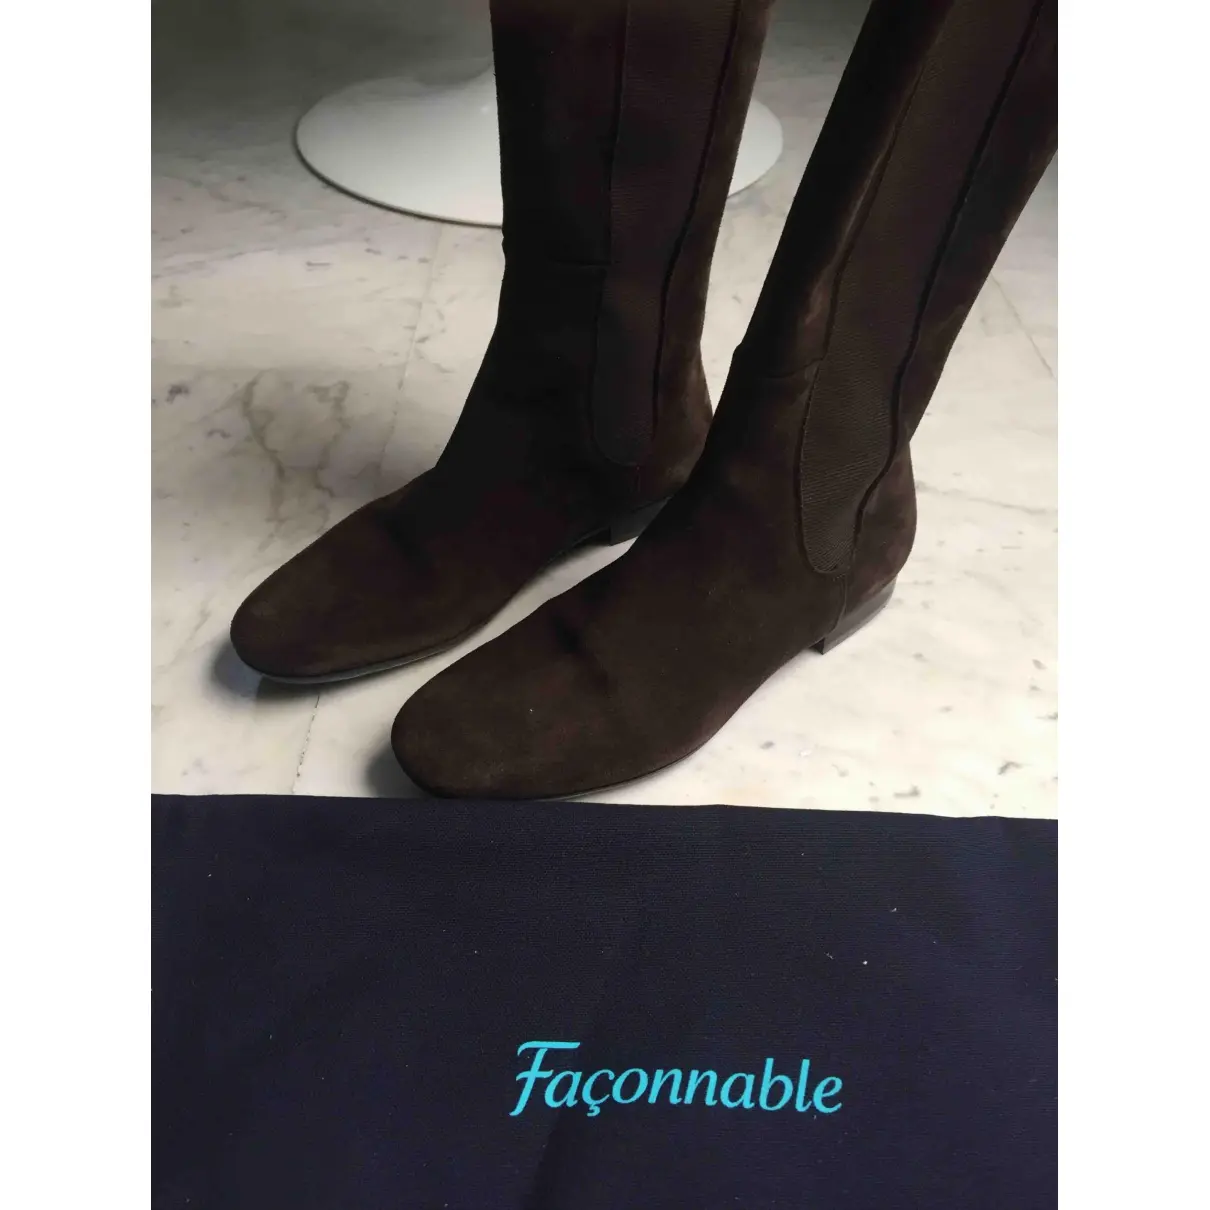 Buy Faconnable Ankle boots online